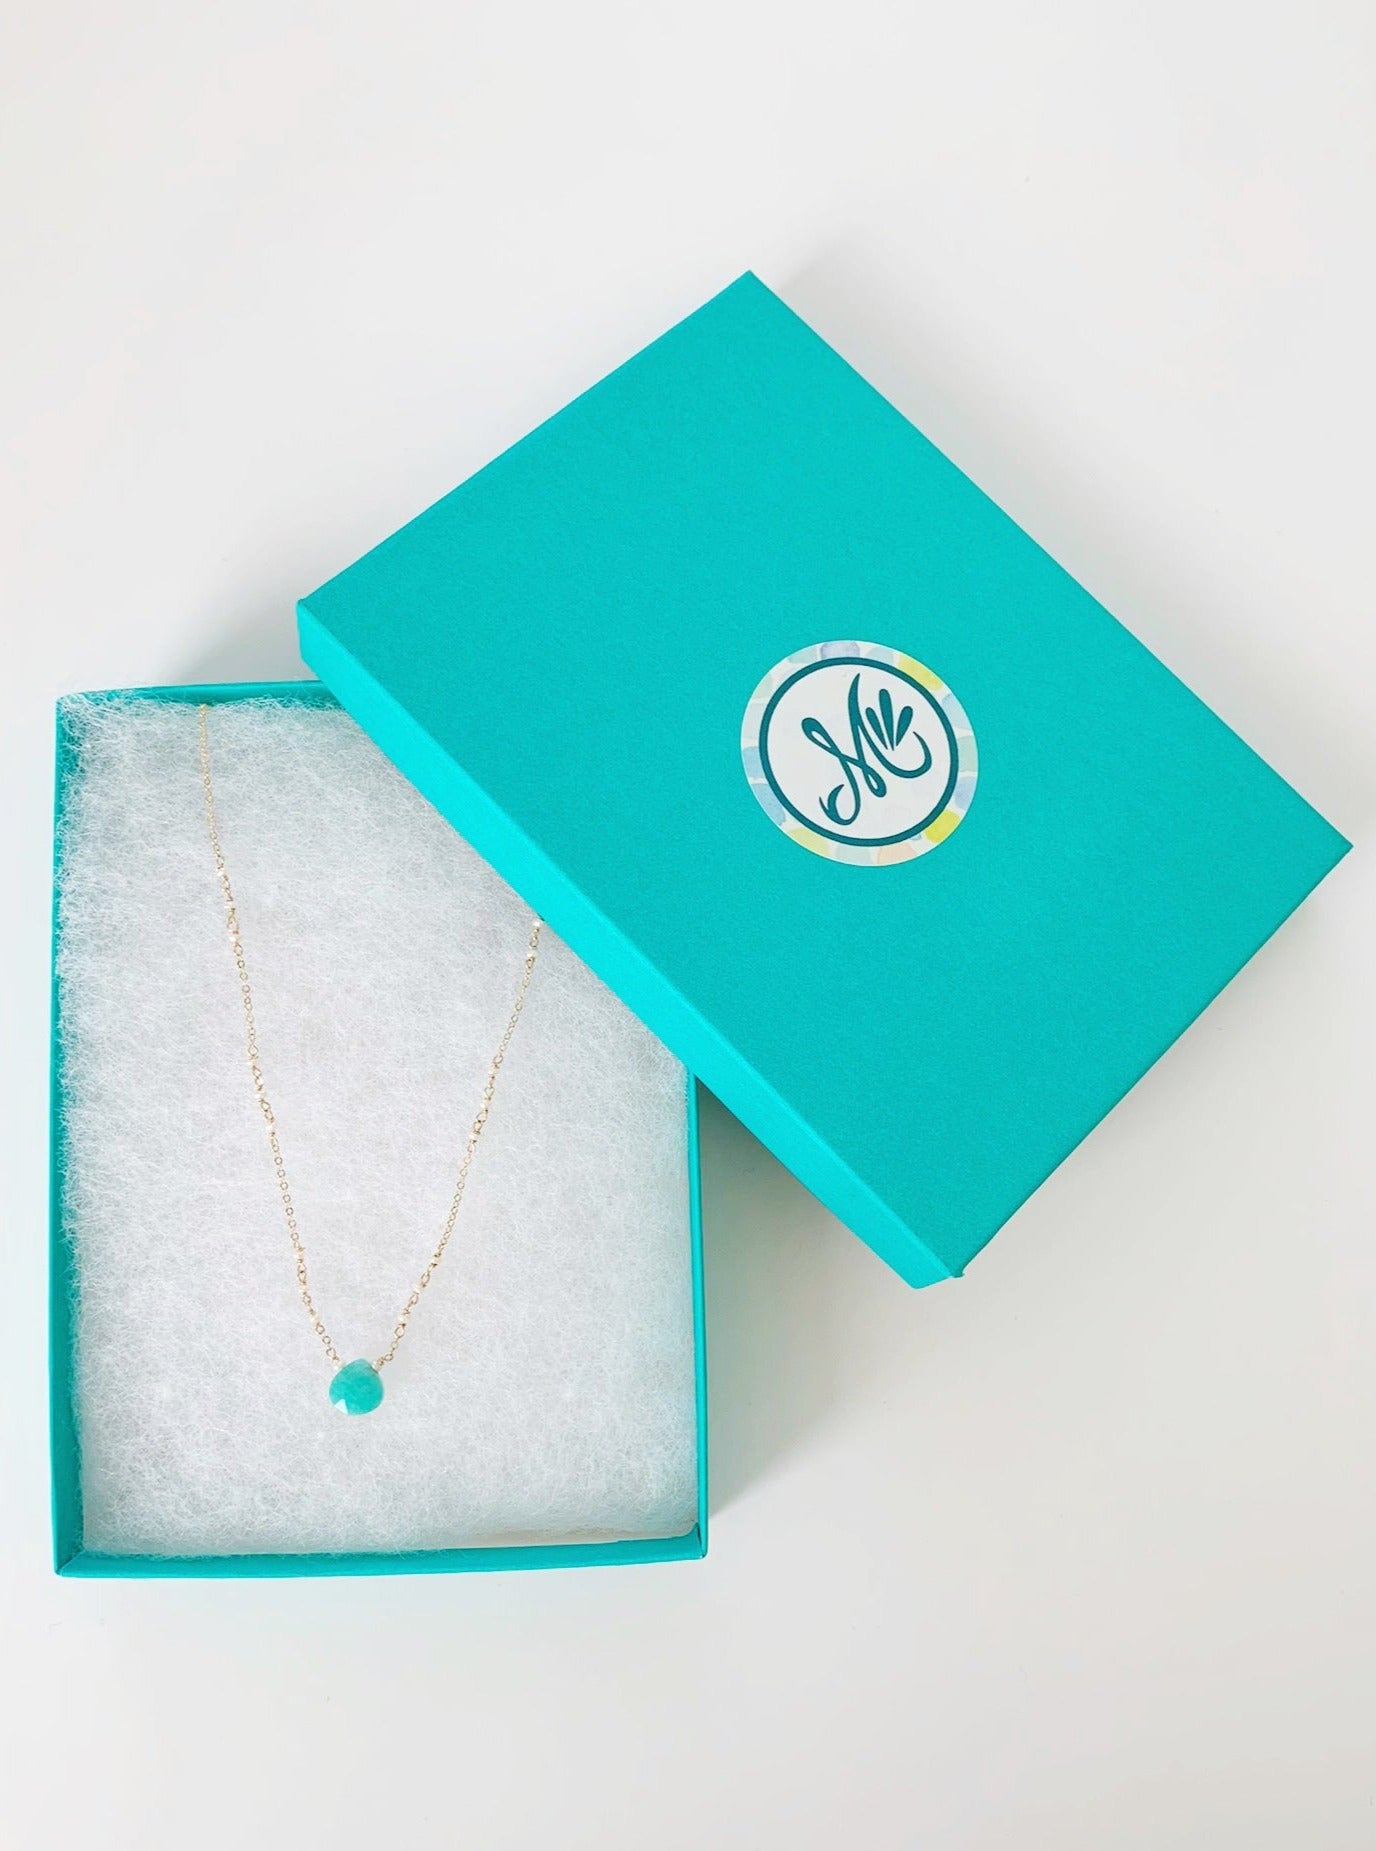 Island Air necklace by mermaids and madeleines pictured here in a white cotton lined teal gift box. The necklace is created with a bright amazonite gem at the center with tiny freshwater pearls on 14k gold filled chain